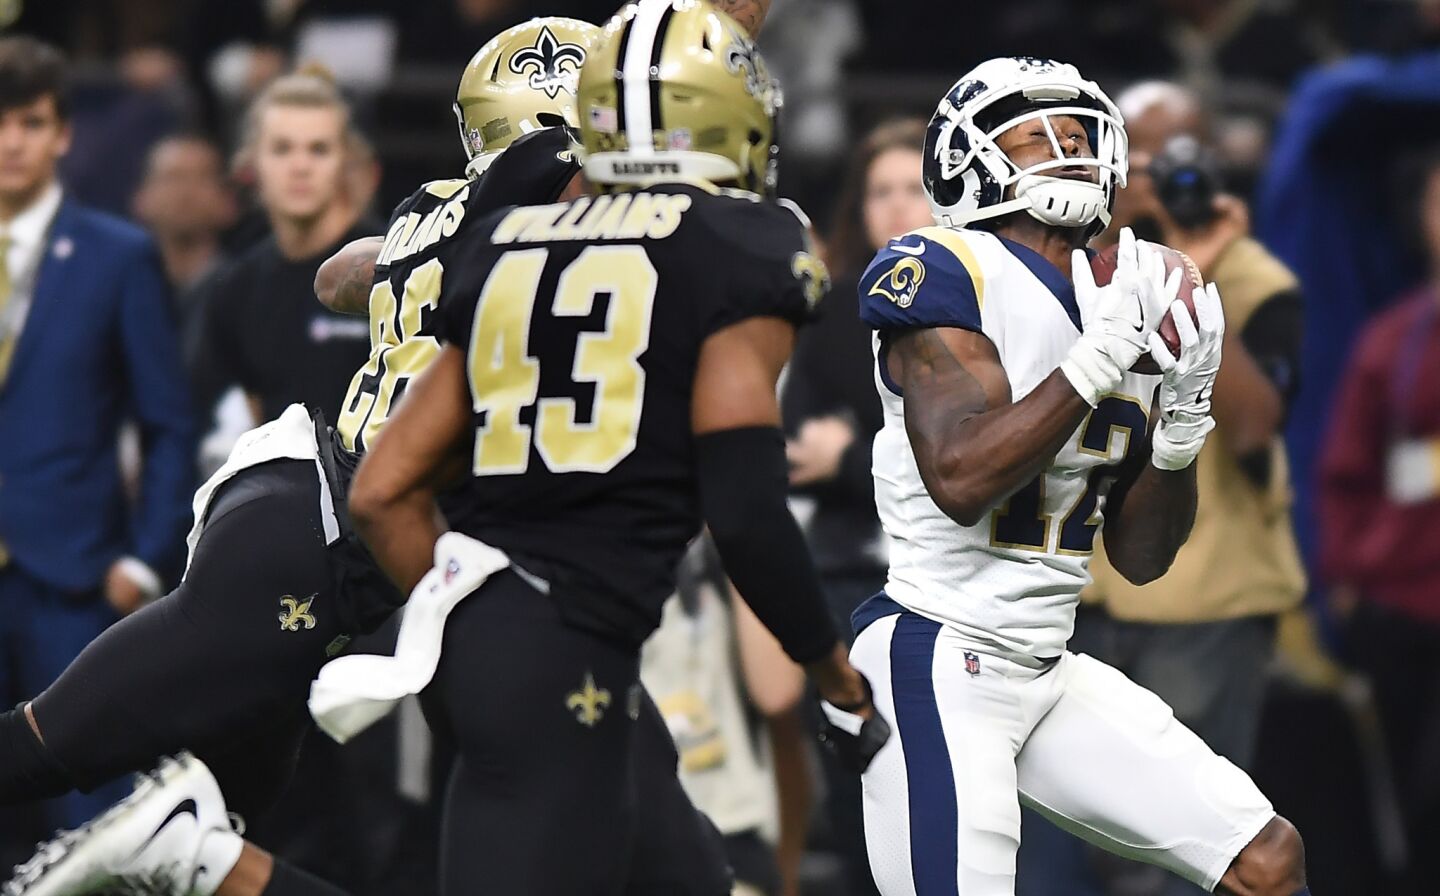 Rams receiver Brandin Cooks makes a catch against the Saints defense to set up a touchdown late in the second quarter in the NFC Championship at the Superdome on Jan. 20.